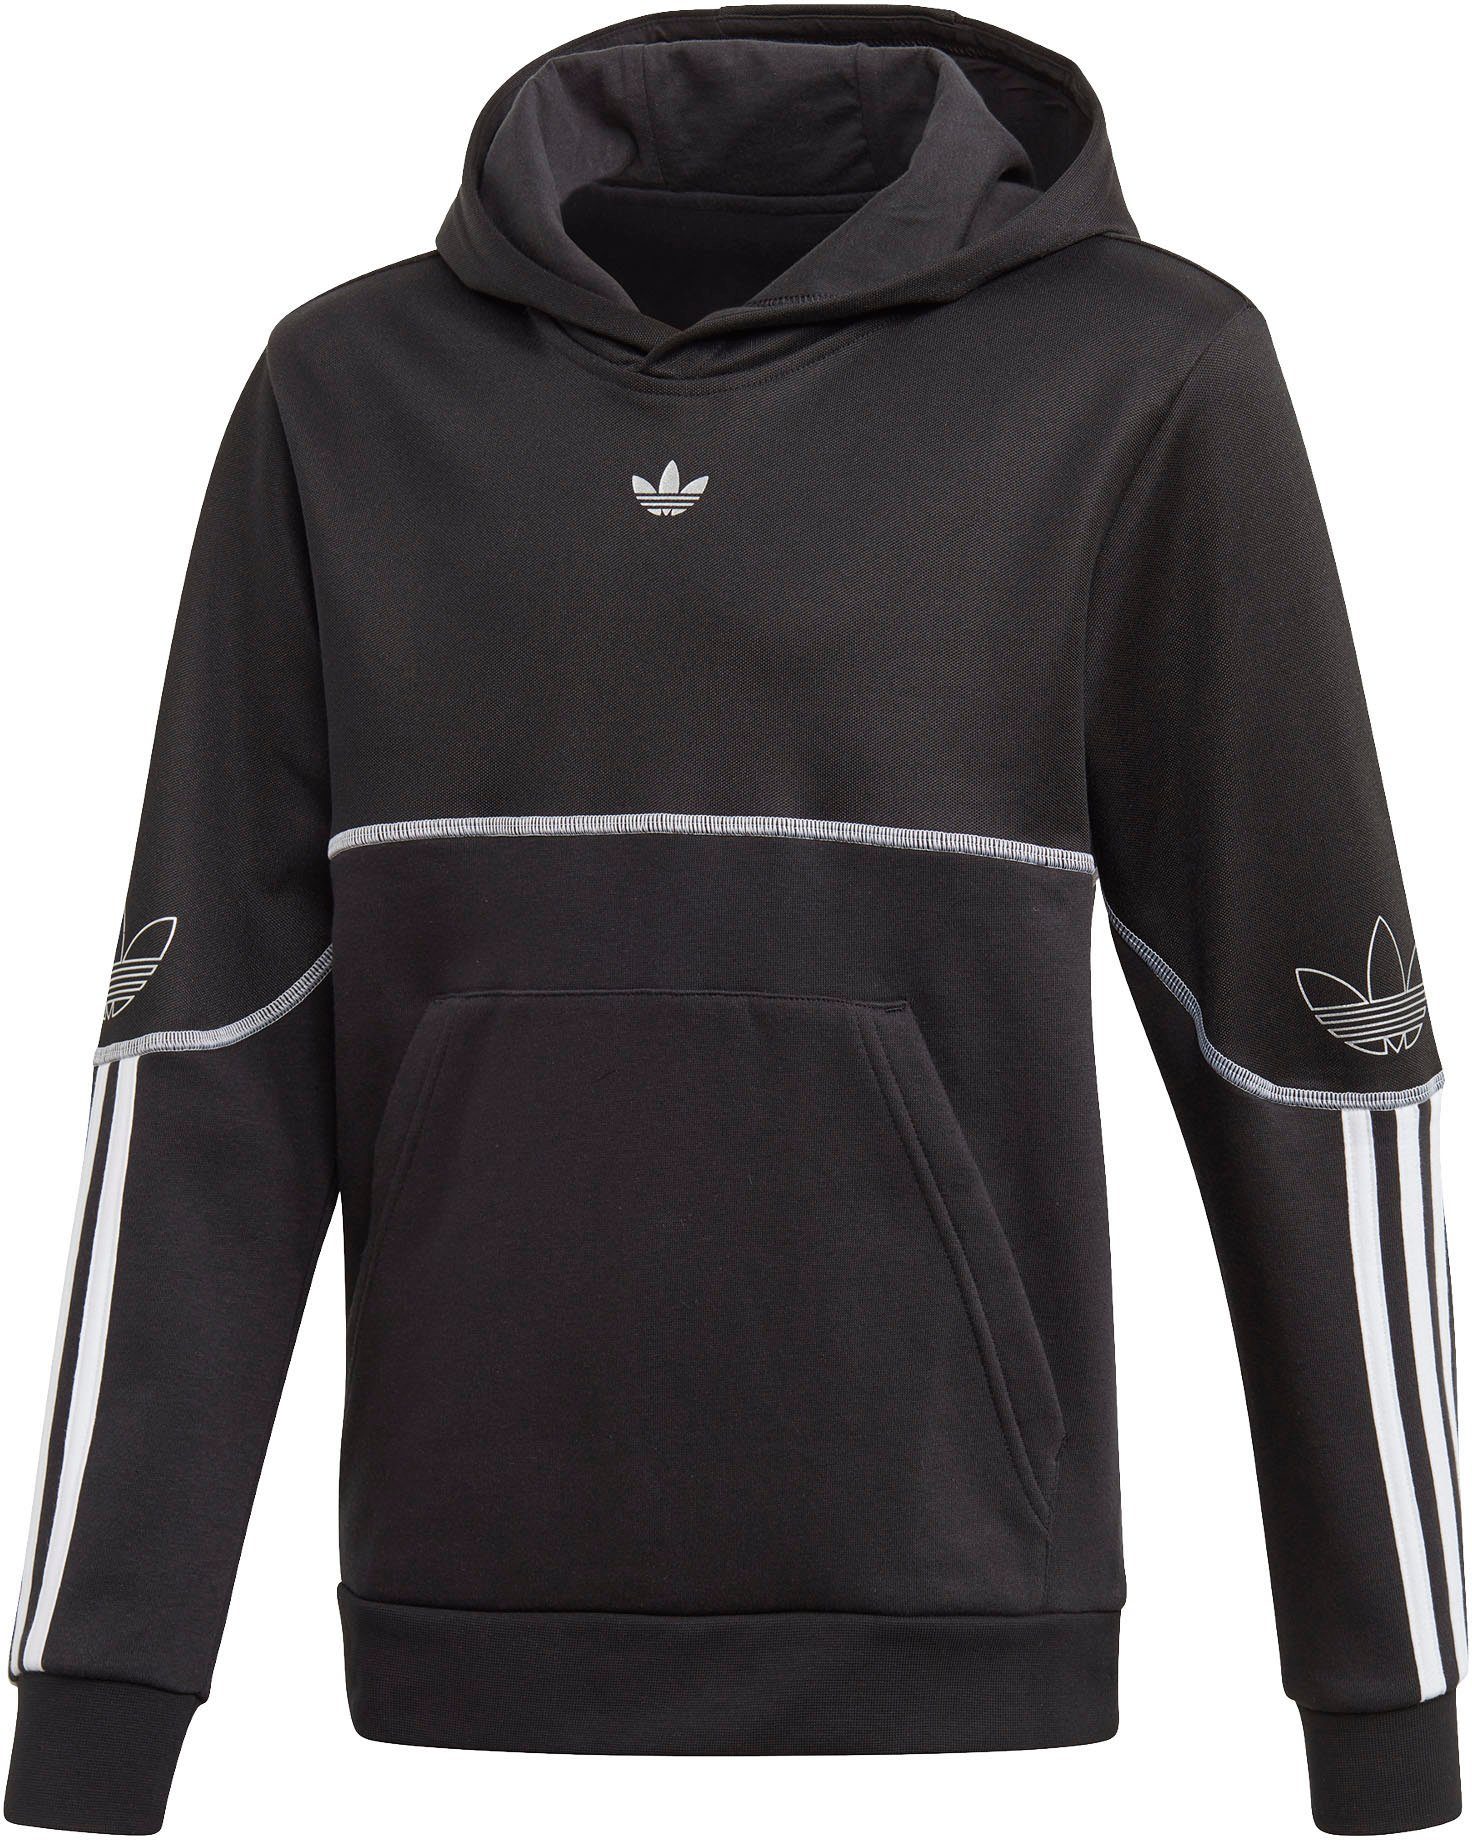 adidas outline sweater